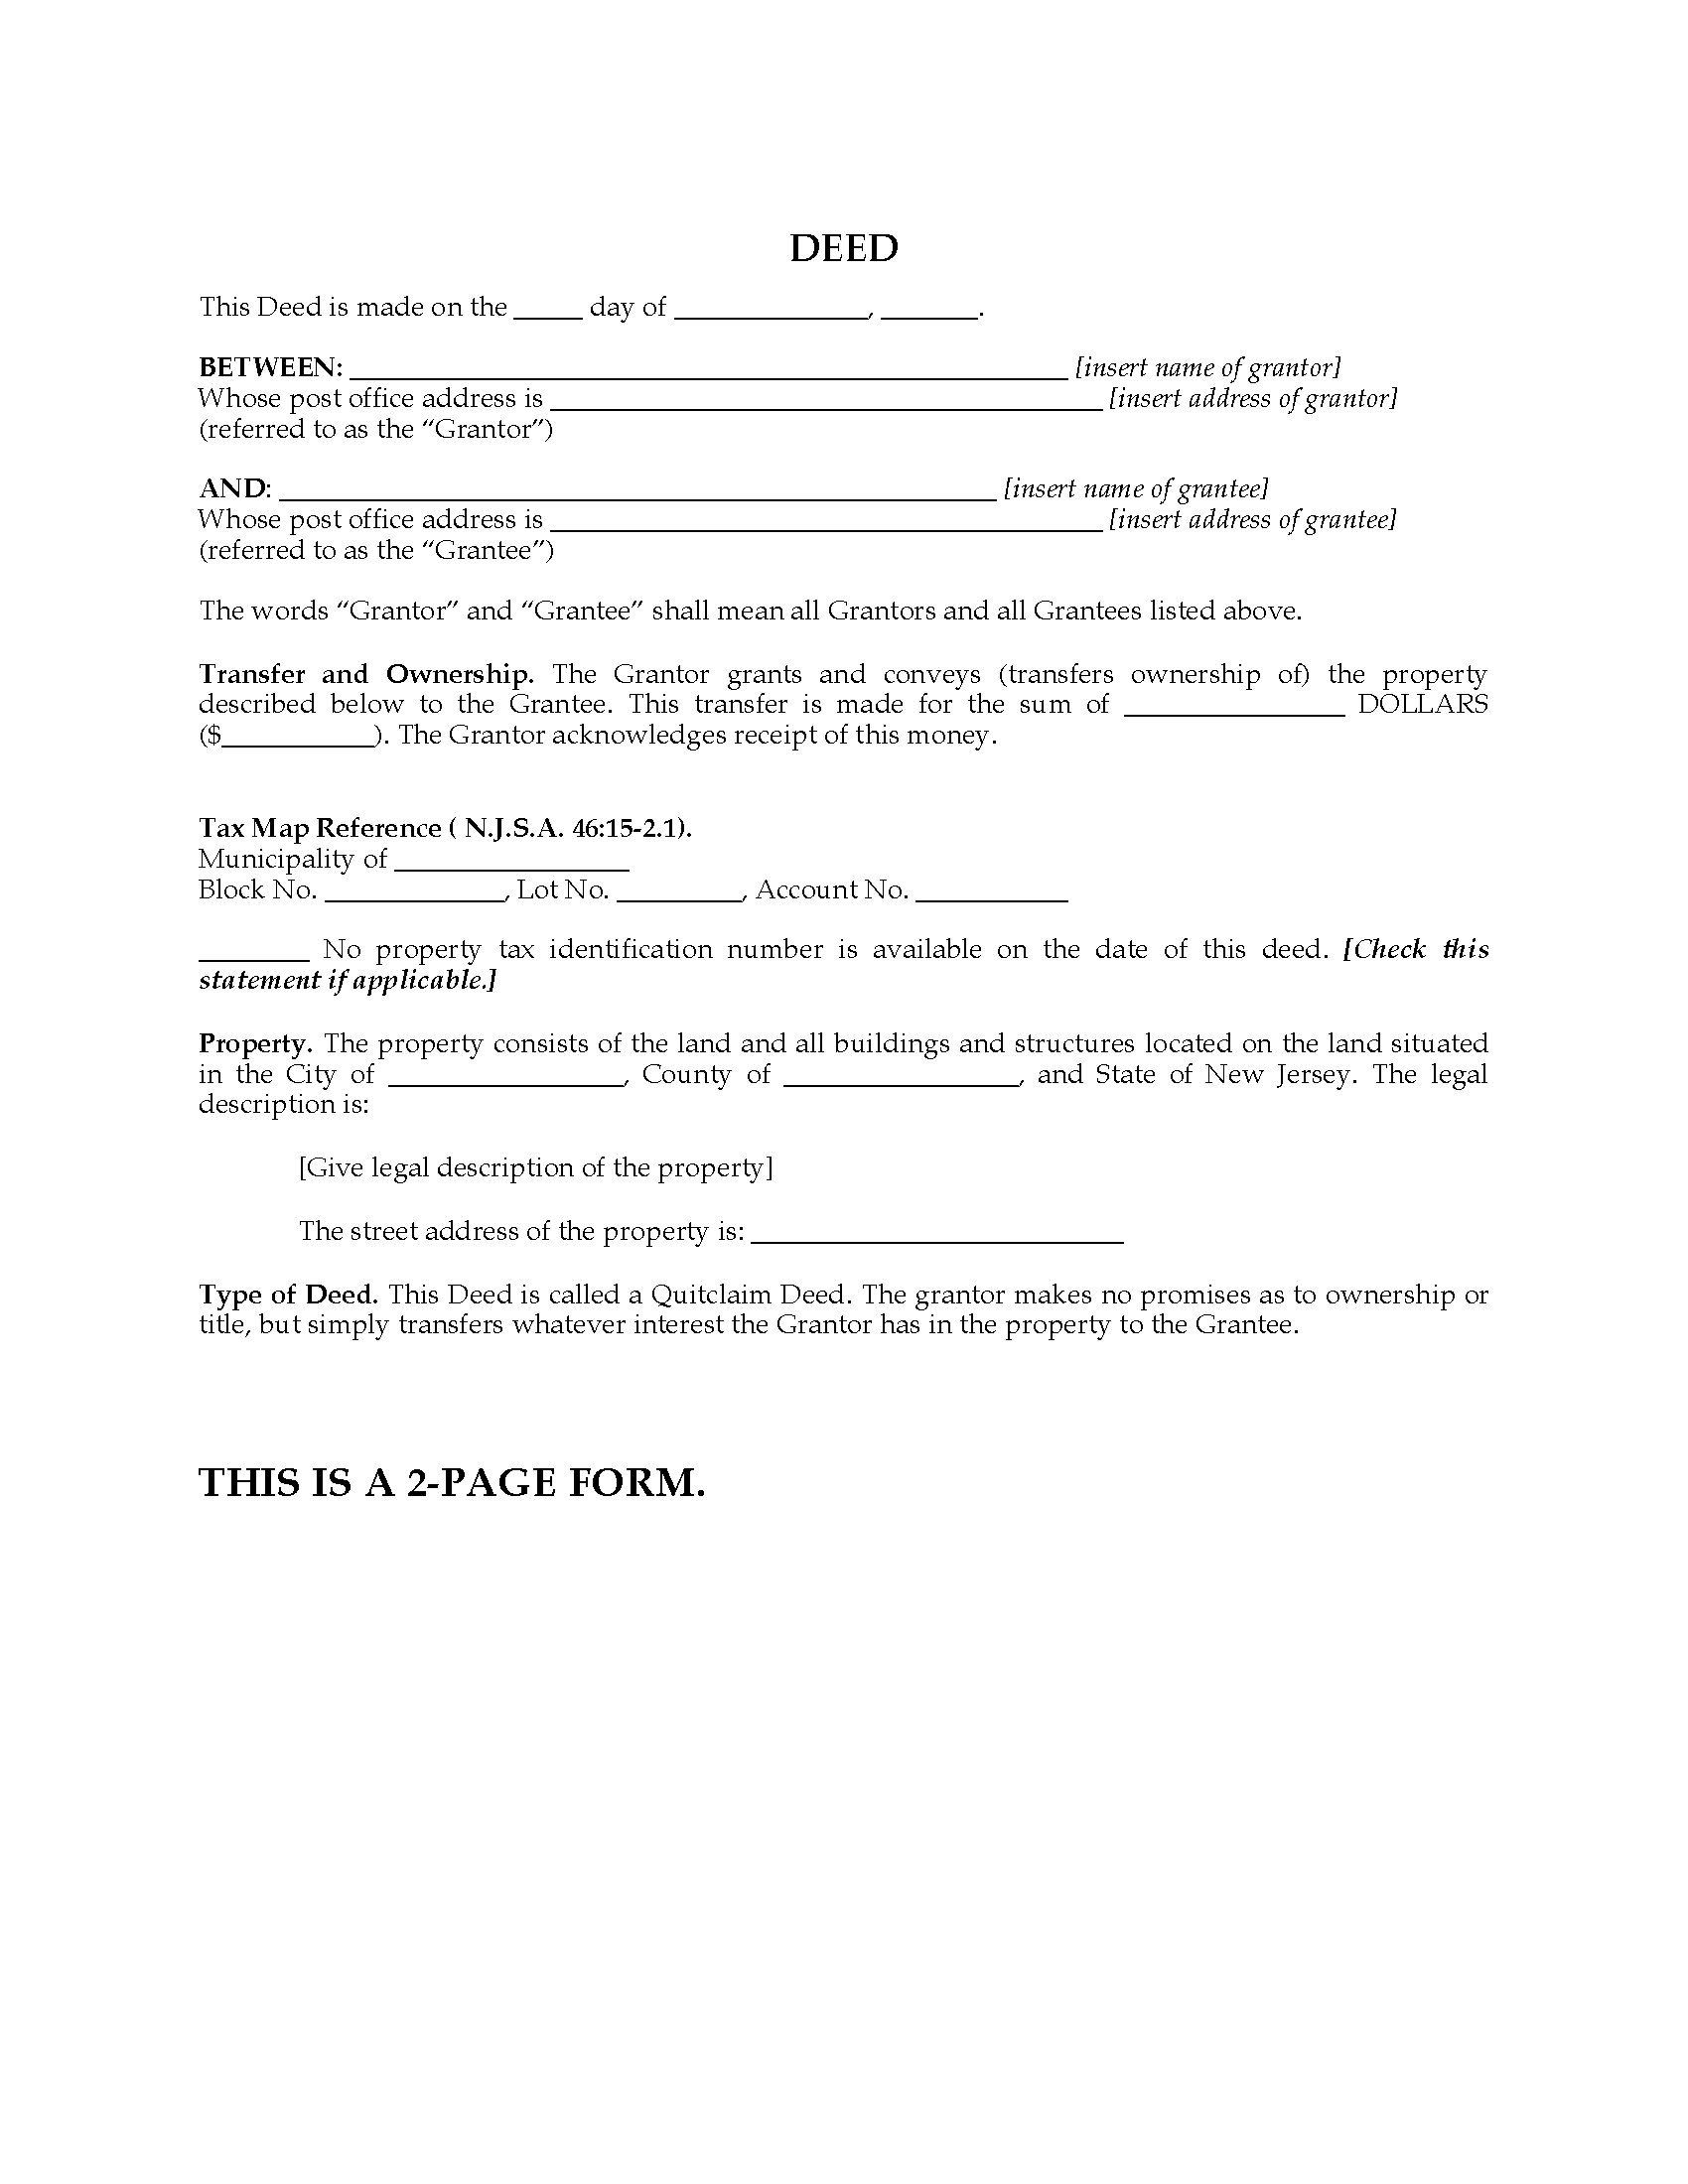 New Jersey Quitclaim Deed Legal Forms And Business Templates Megadox Com